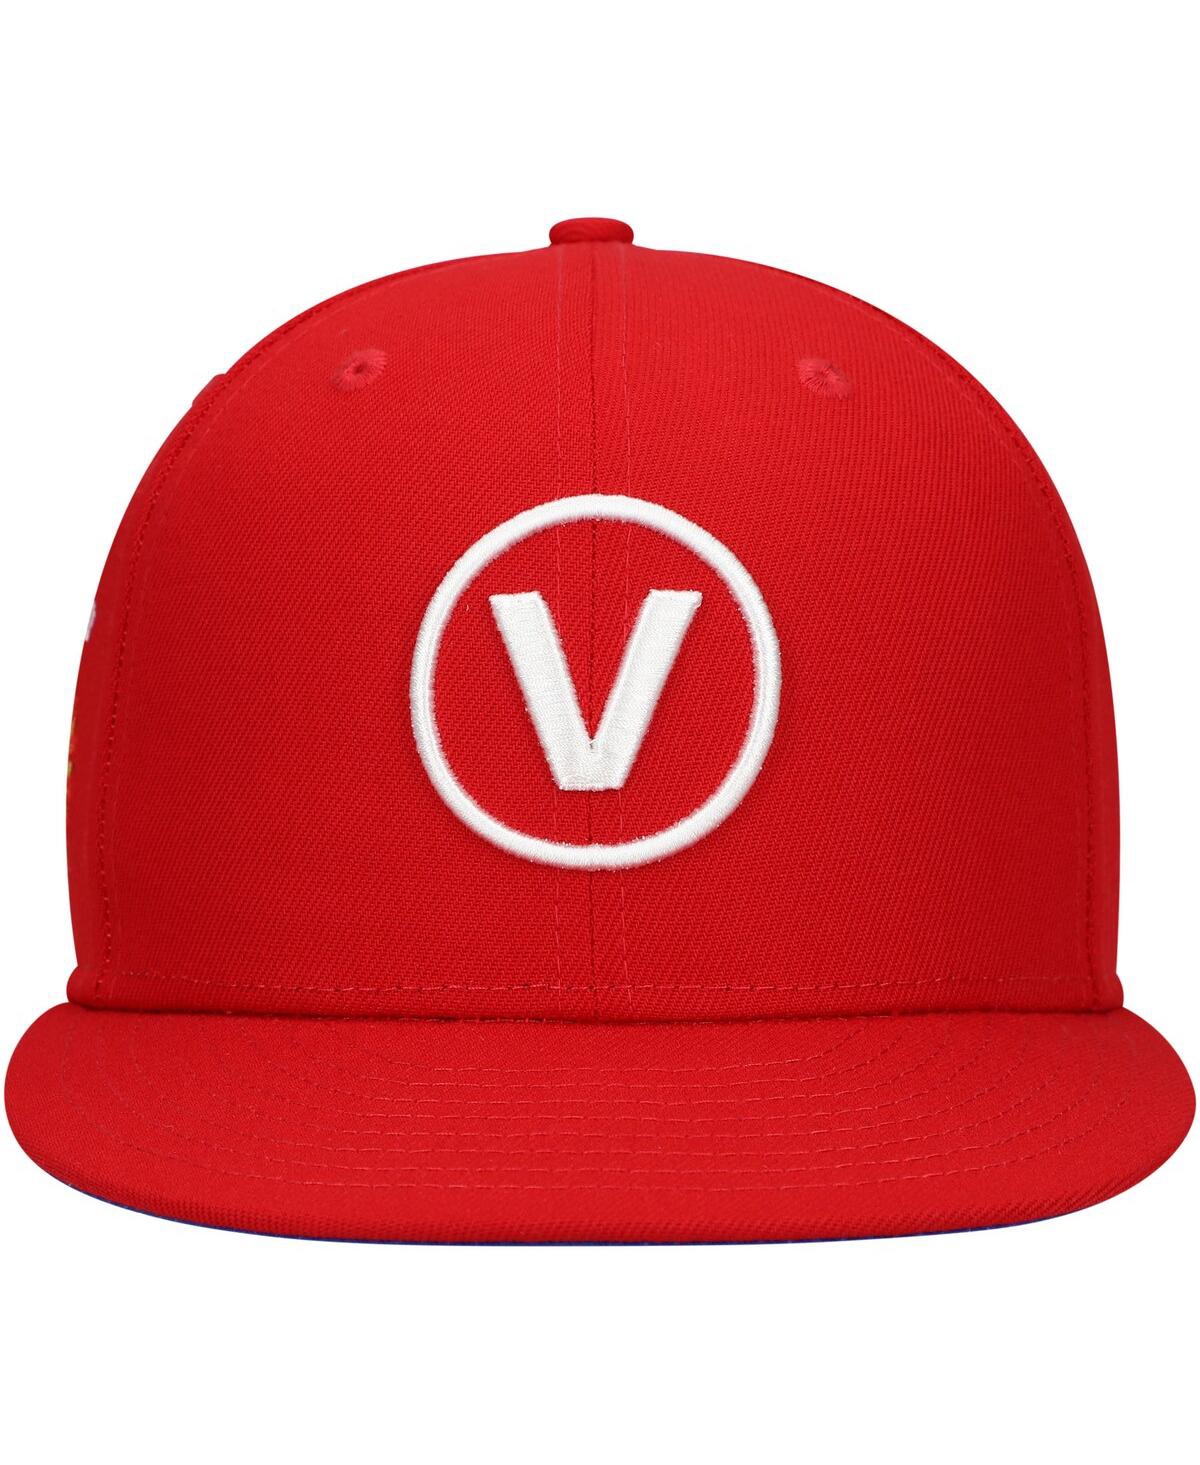 Shop Rings & Crwns Men's  Red Vargas Campeones Team Fitted Hat